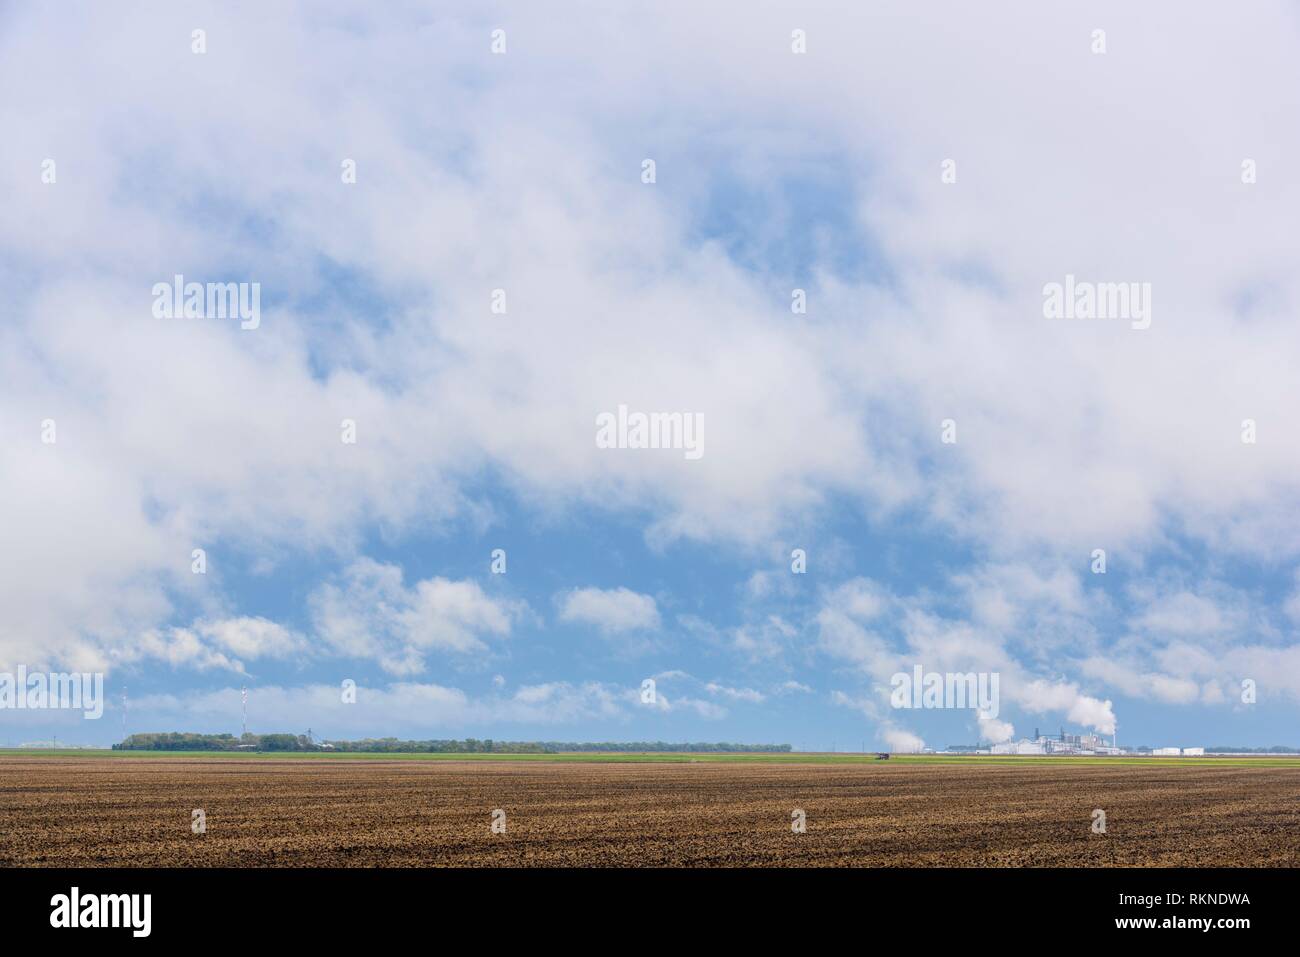 Clearing storm, agricultural fields and distant industrial complex, Fargo, North Dakota, USA. Stock Photo